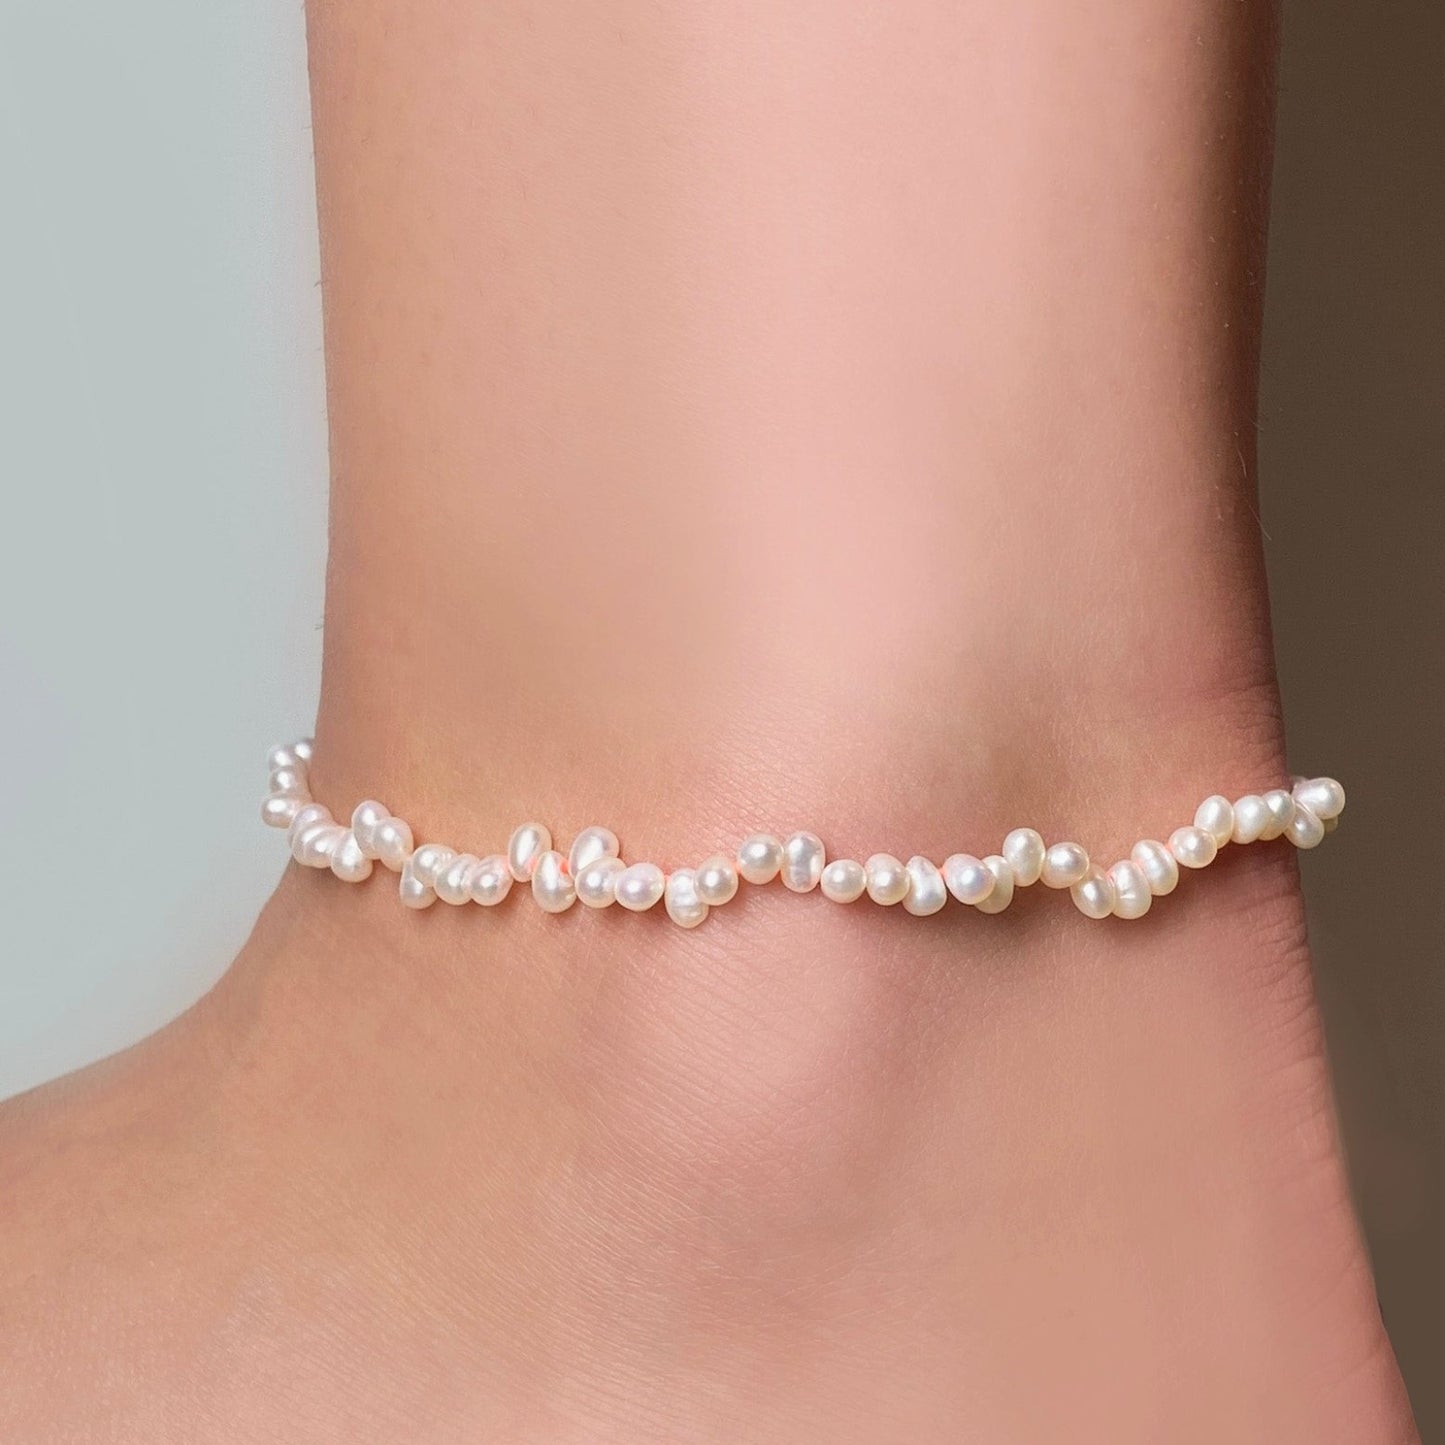 Neon + Pearls Anklet